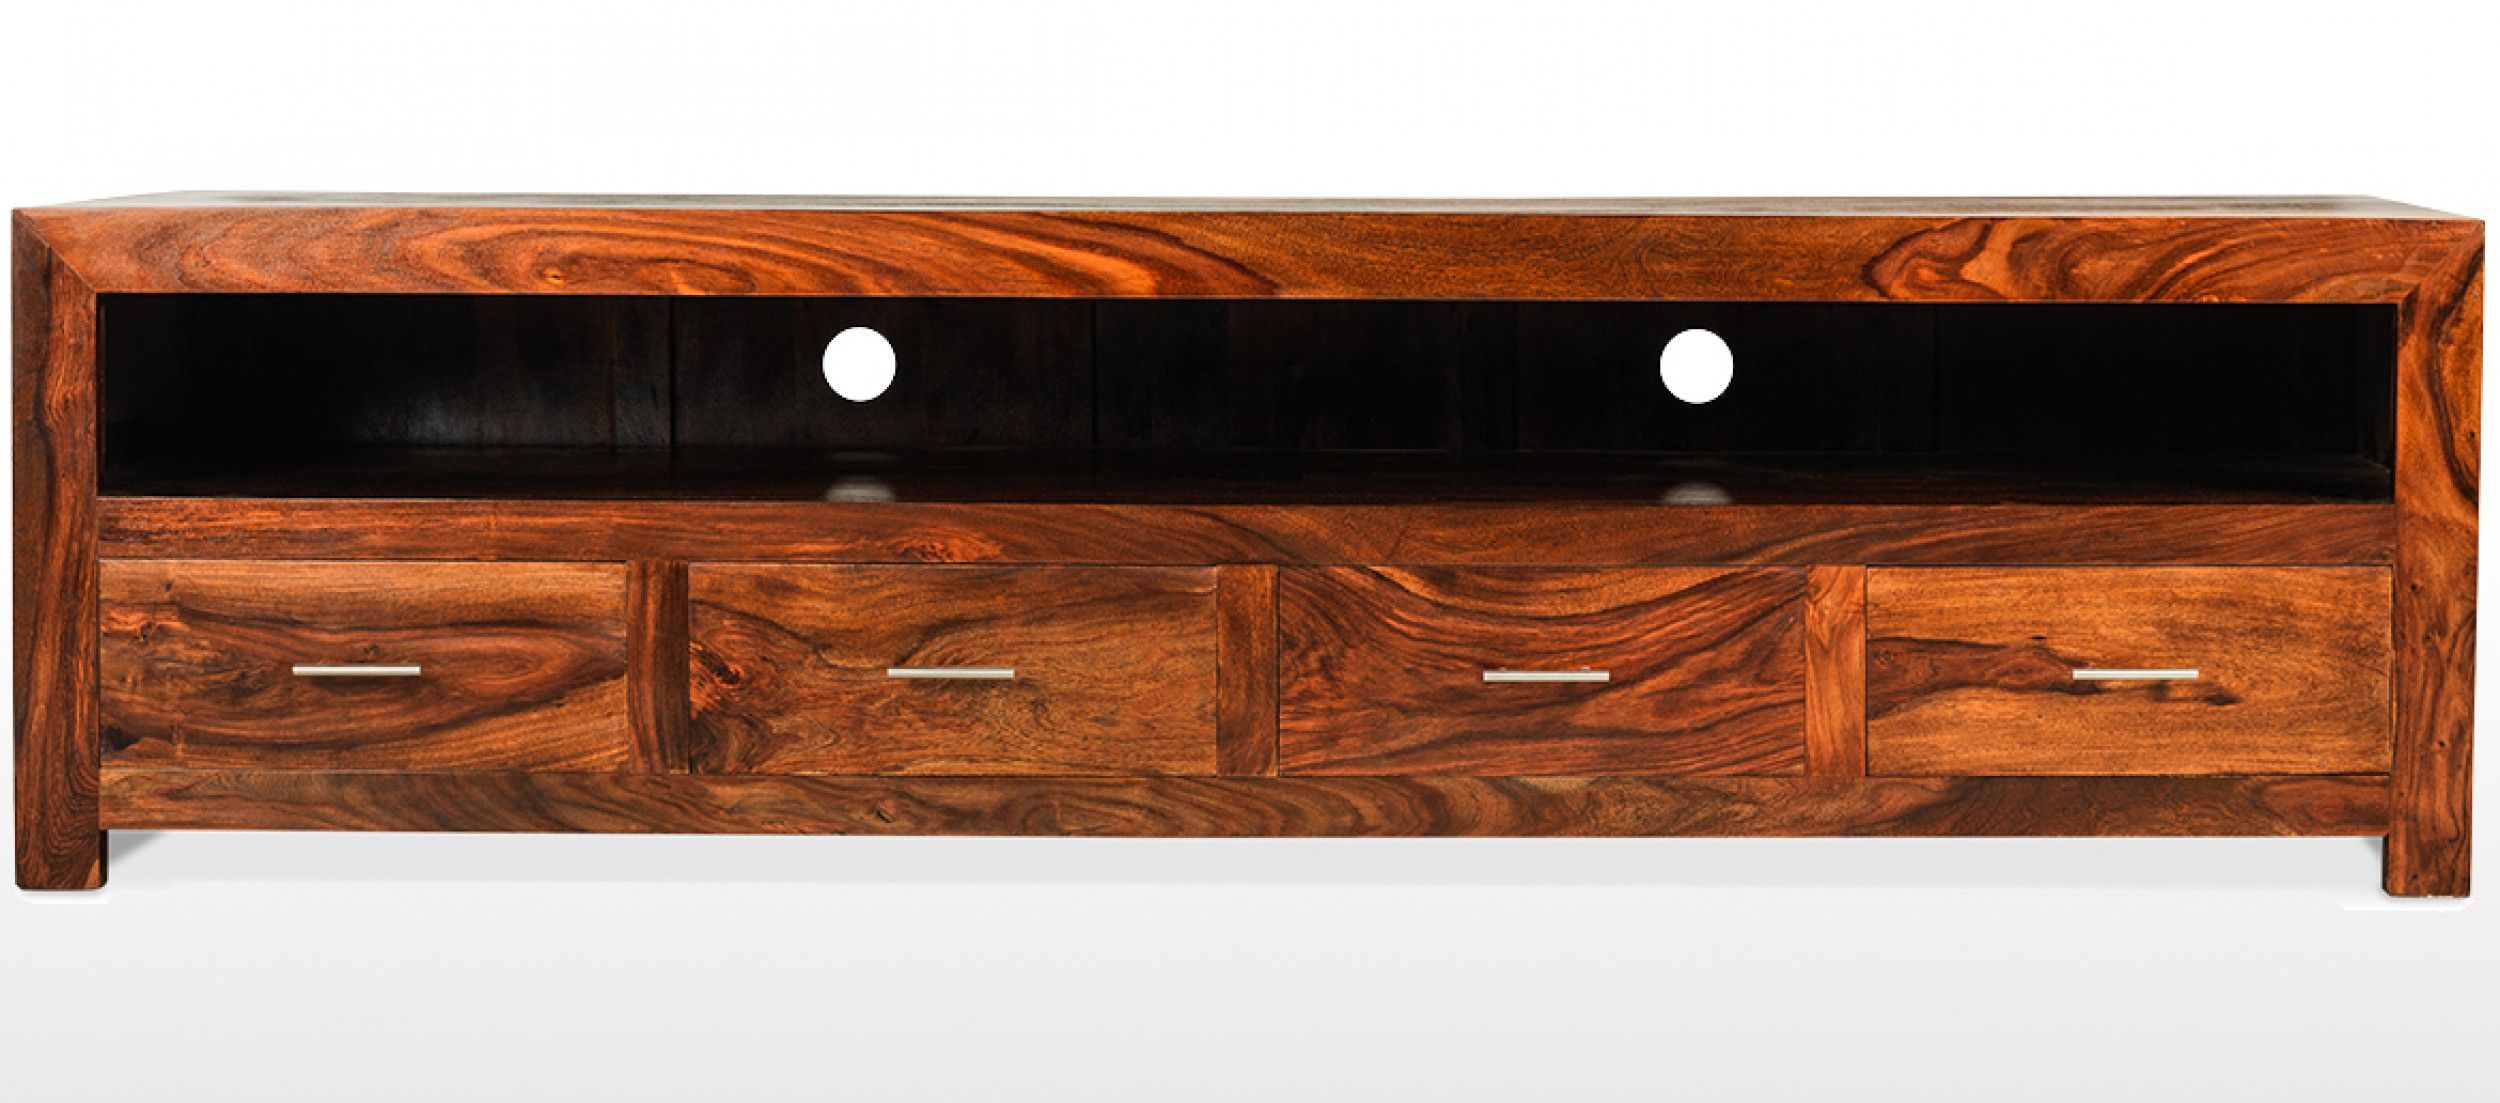 Cube Sheesham Long Plasma Tv Cabinet | Quercus Living For Long Tv Stands Furniture (View 15 of 15)